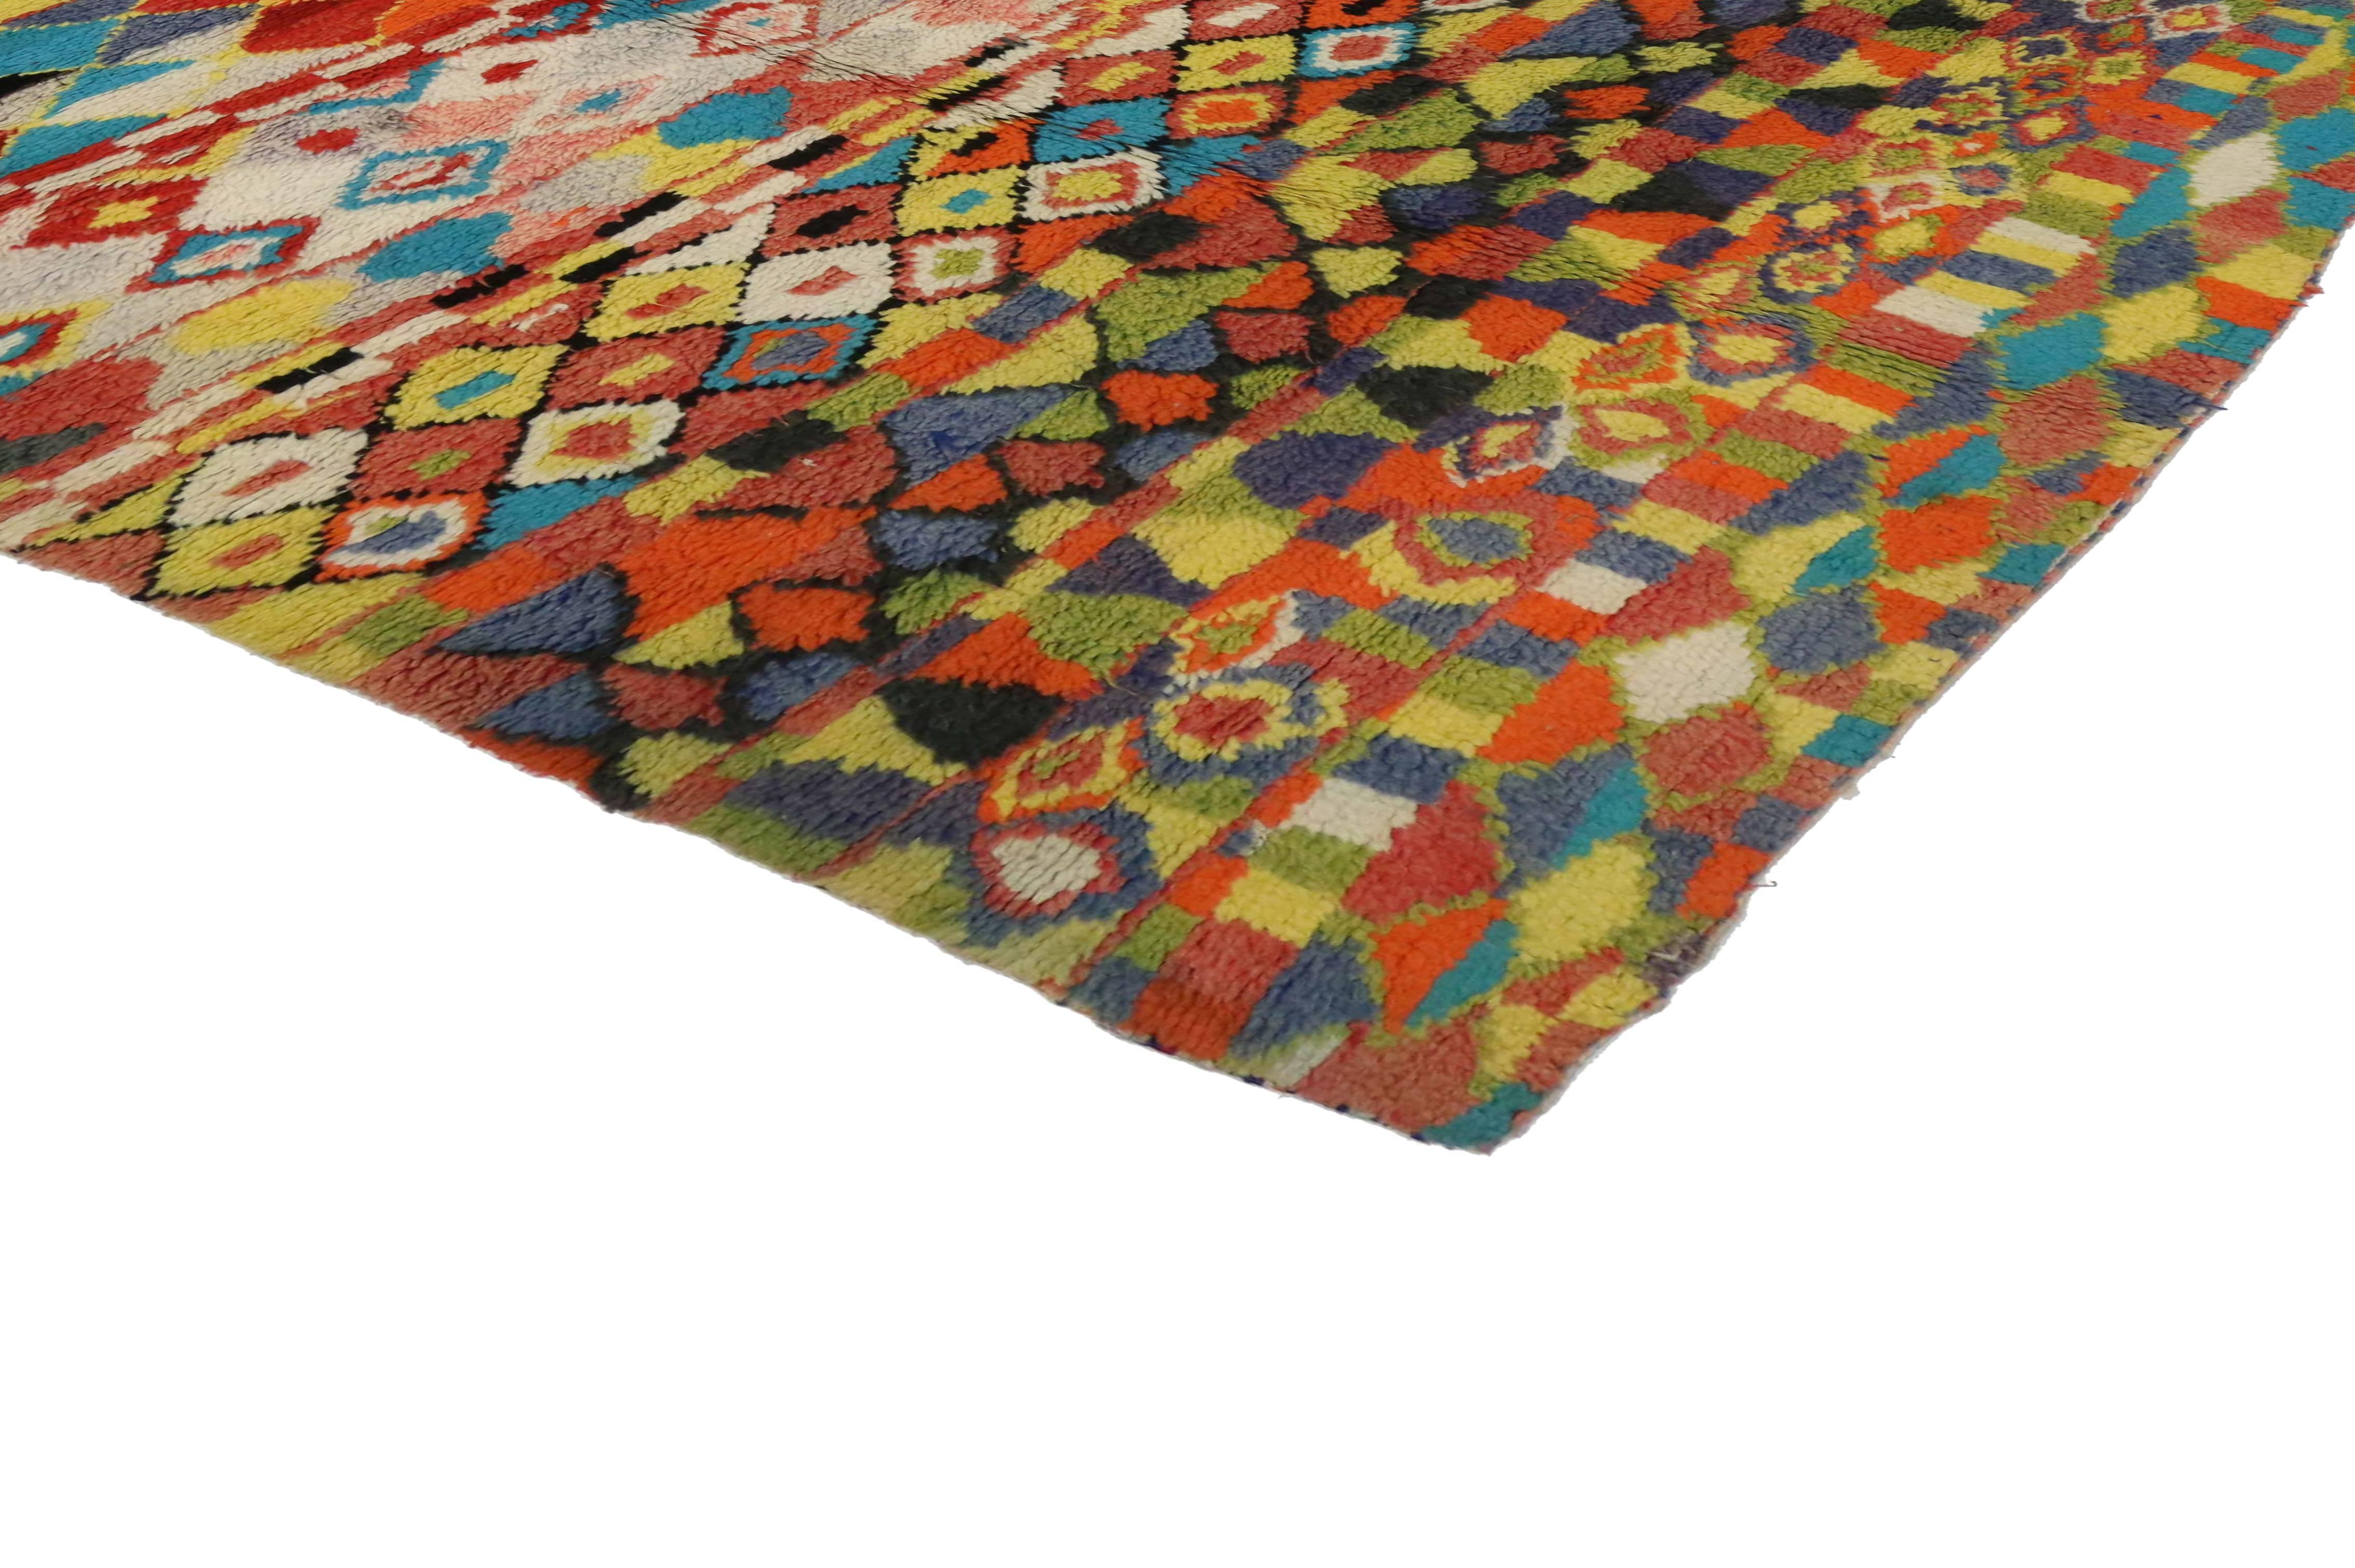 Post-Modern Vintage Moroccan Rug with Contemporary Abstract Design, Berber Moroccan Rug